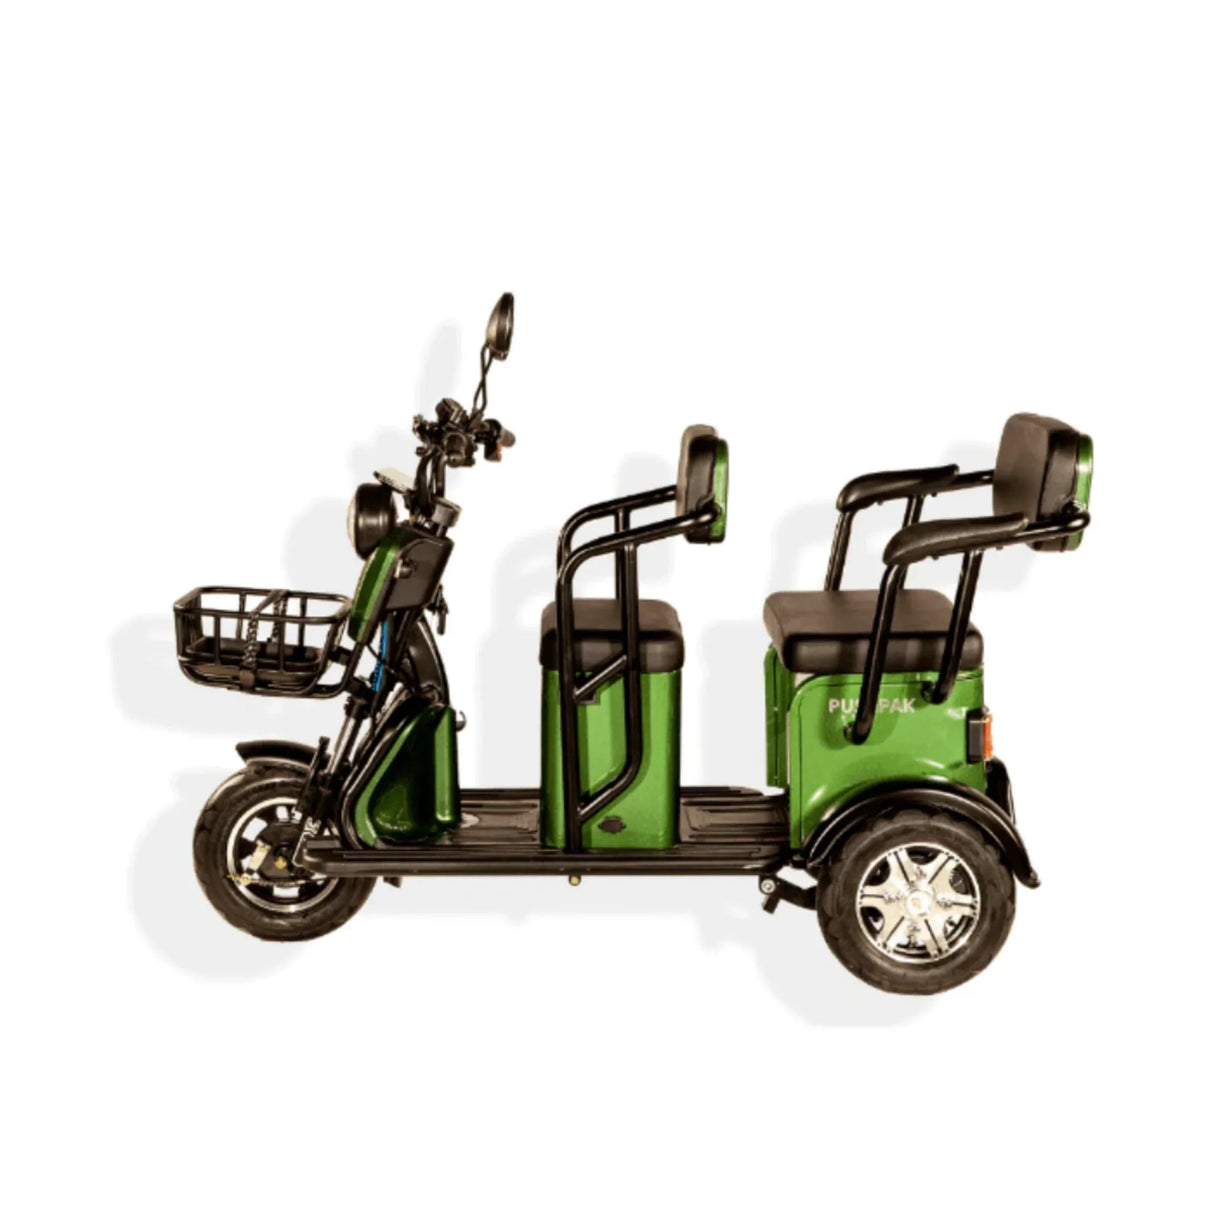 Pushpak 3500 2-Person Electric Mobility Scooter